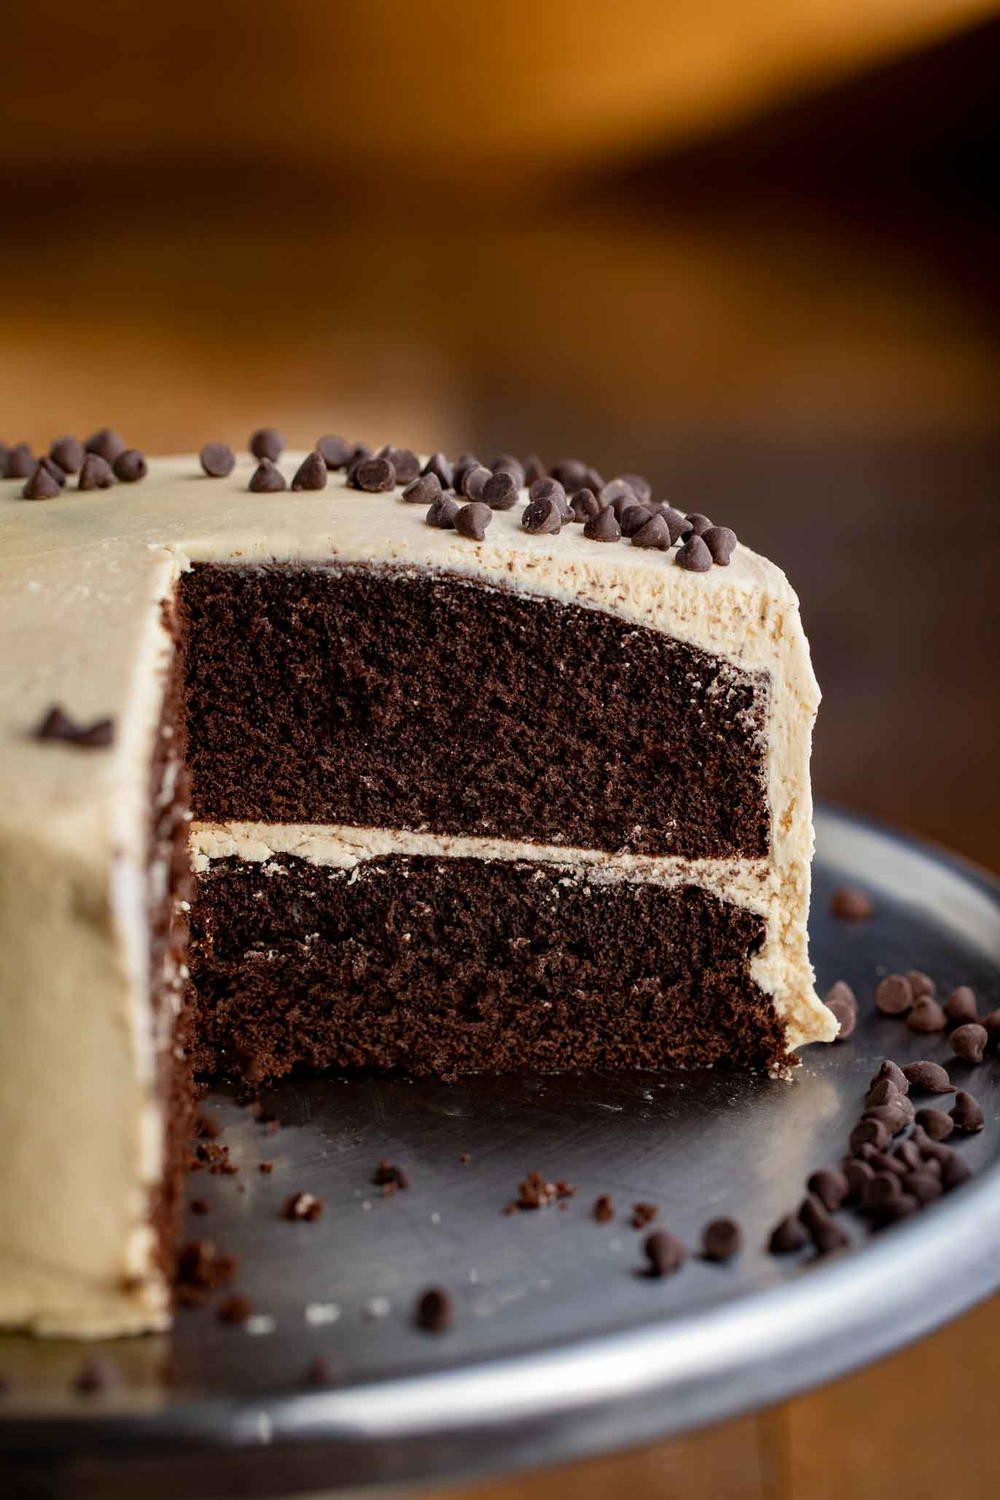 15 Of the Best Ideas for Chocolate Peanut butter Cake